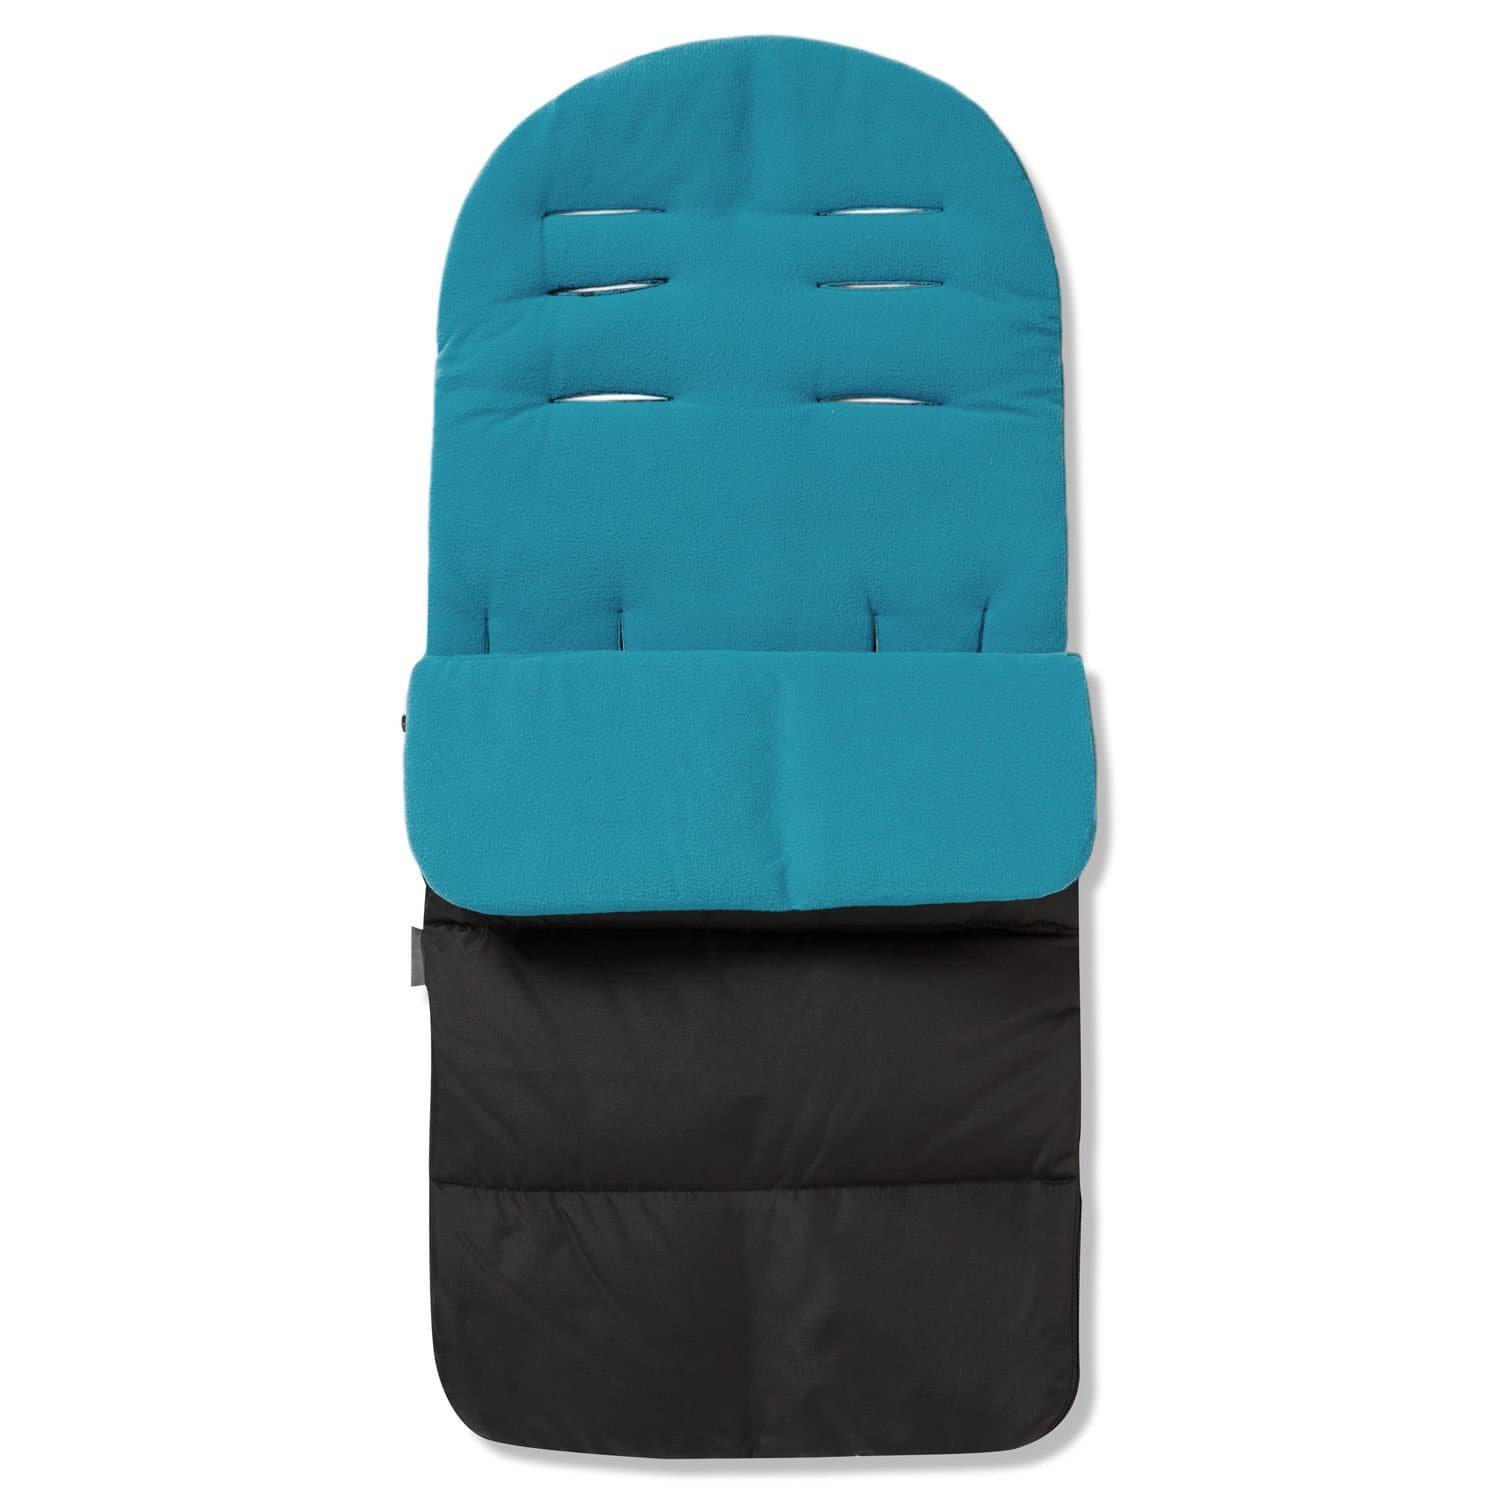 Premium Footmuff / Cosy Toes Compatible with BabyDan - Ocean Blue / Fits All Models | For Your Little One